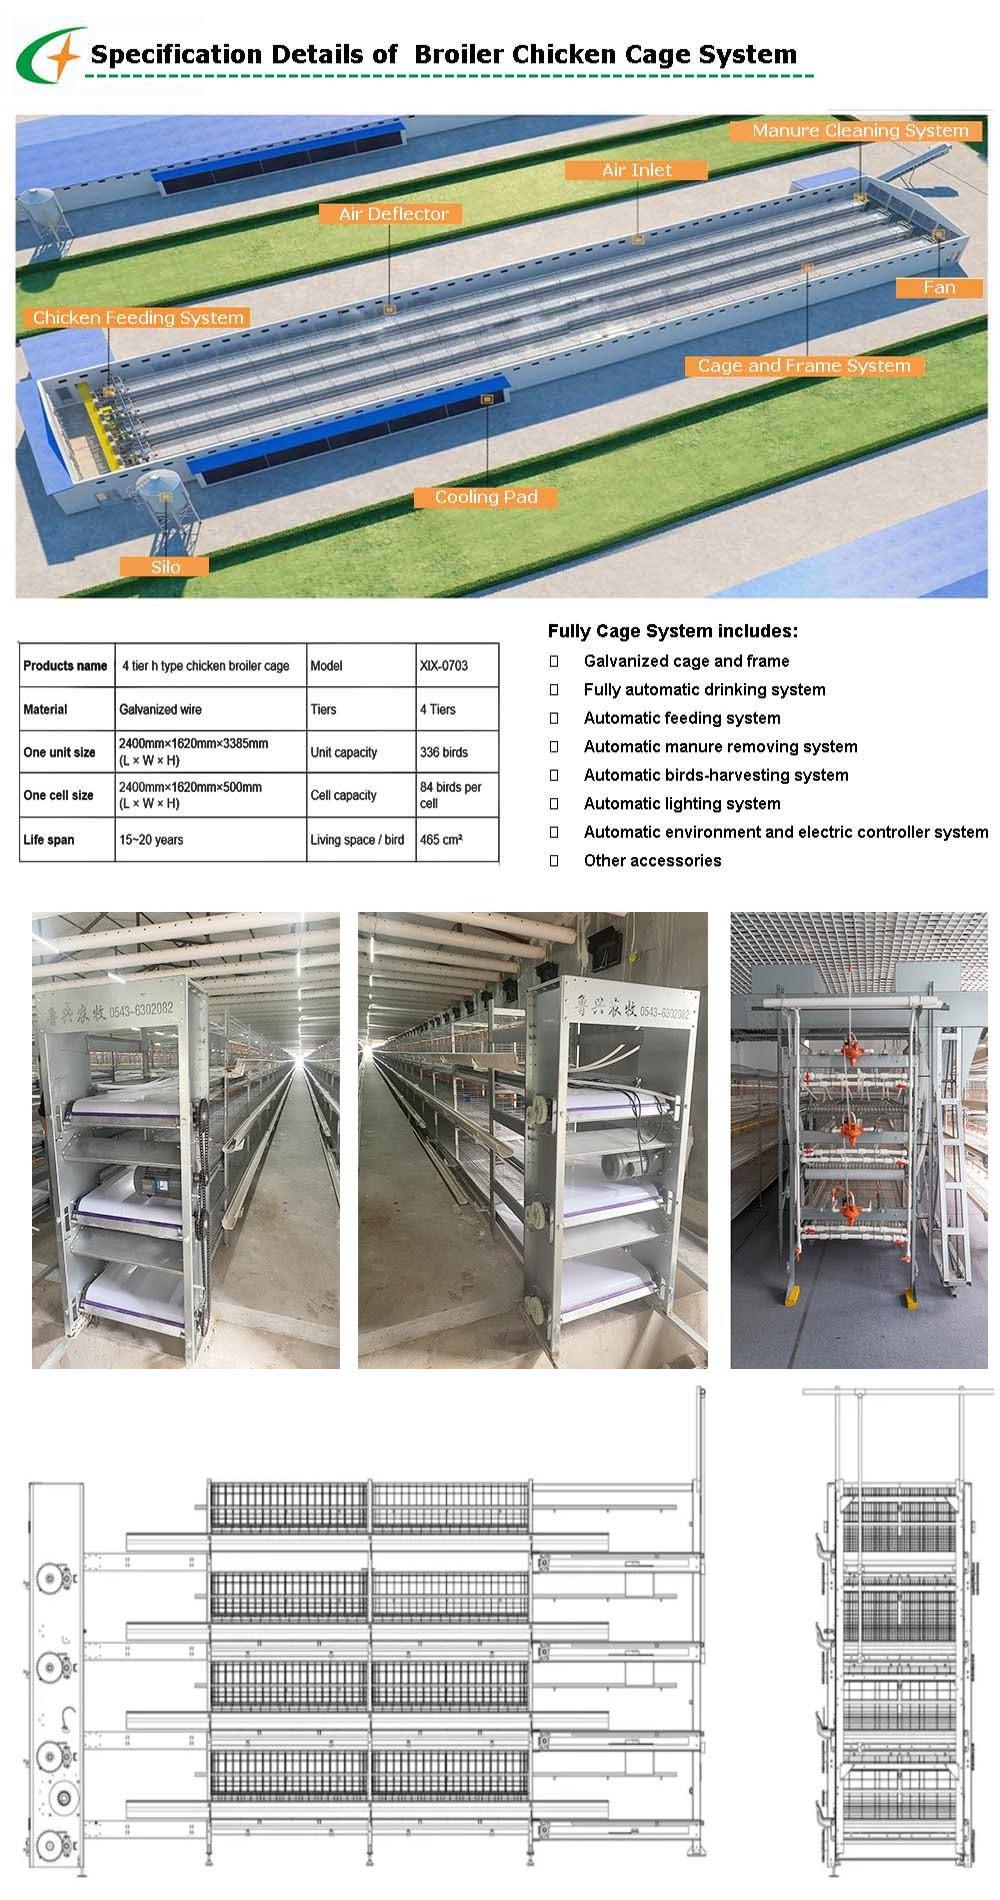 High Quality H-Type 3-Layer Automatic Chicken Breeding Equipment